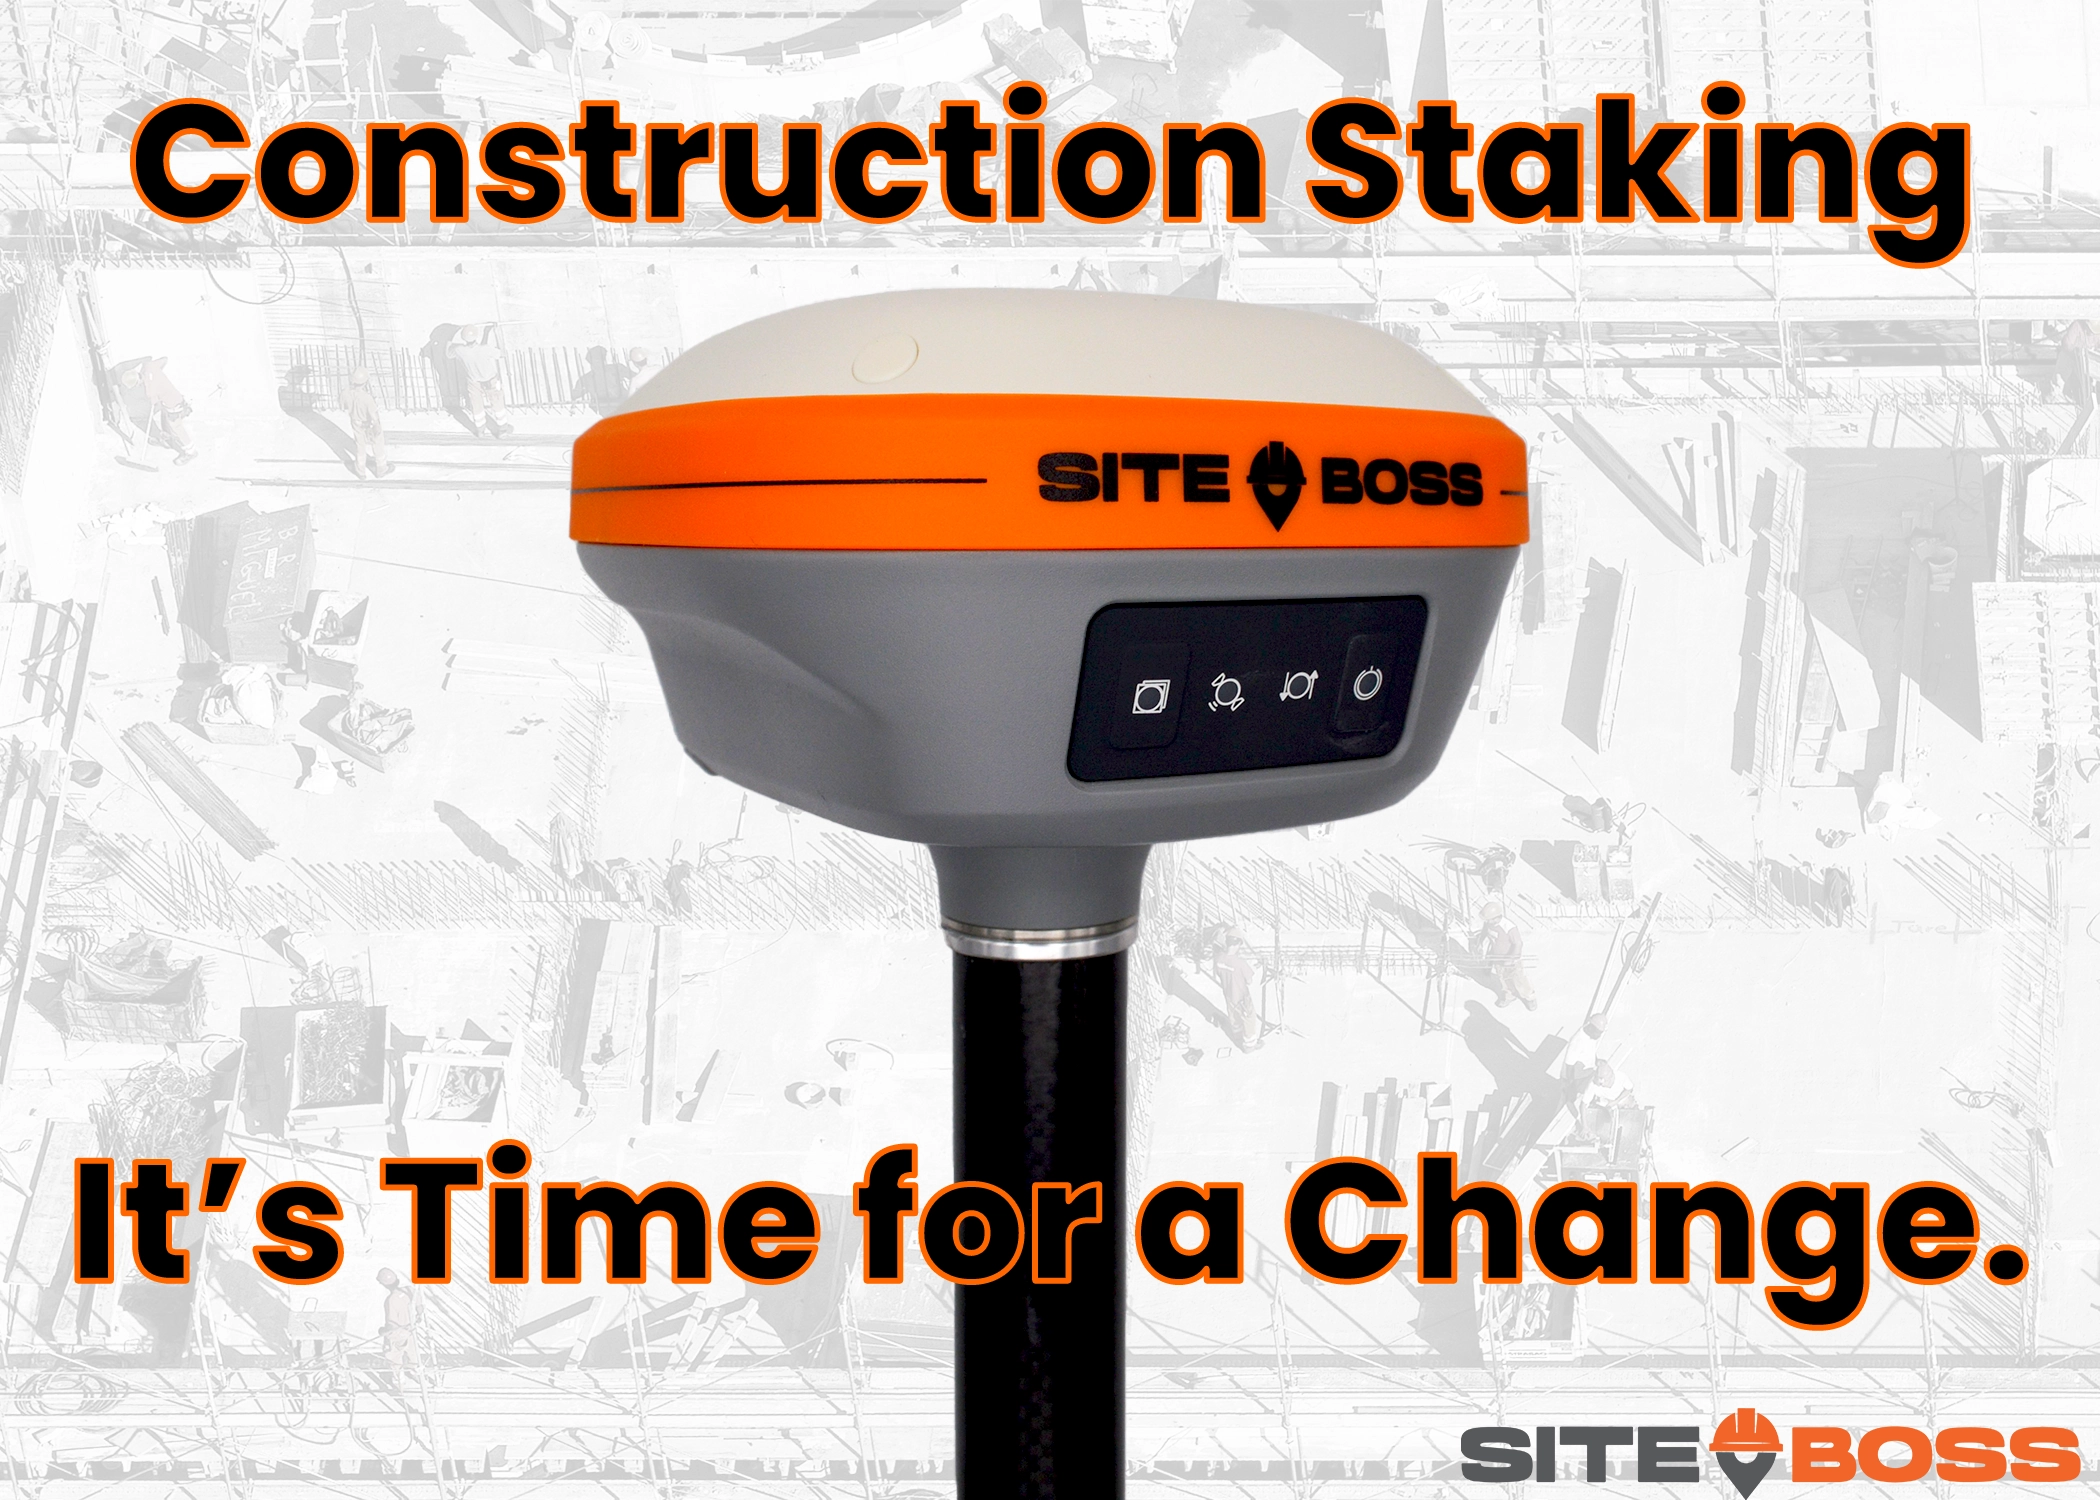 Construction Staking - It's Time for a Change